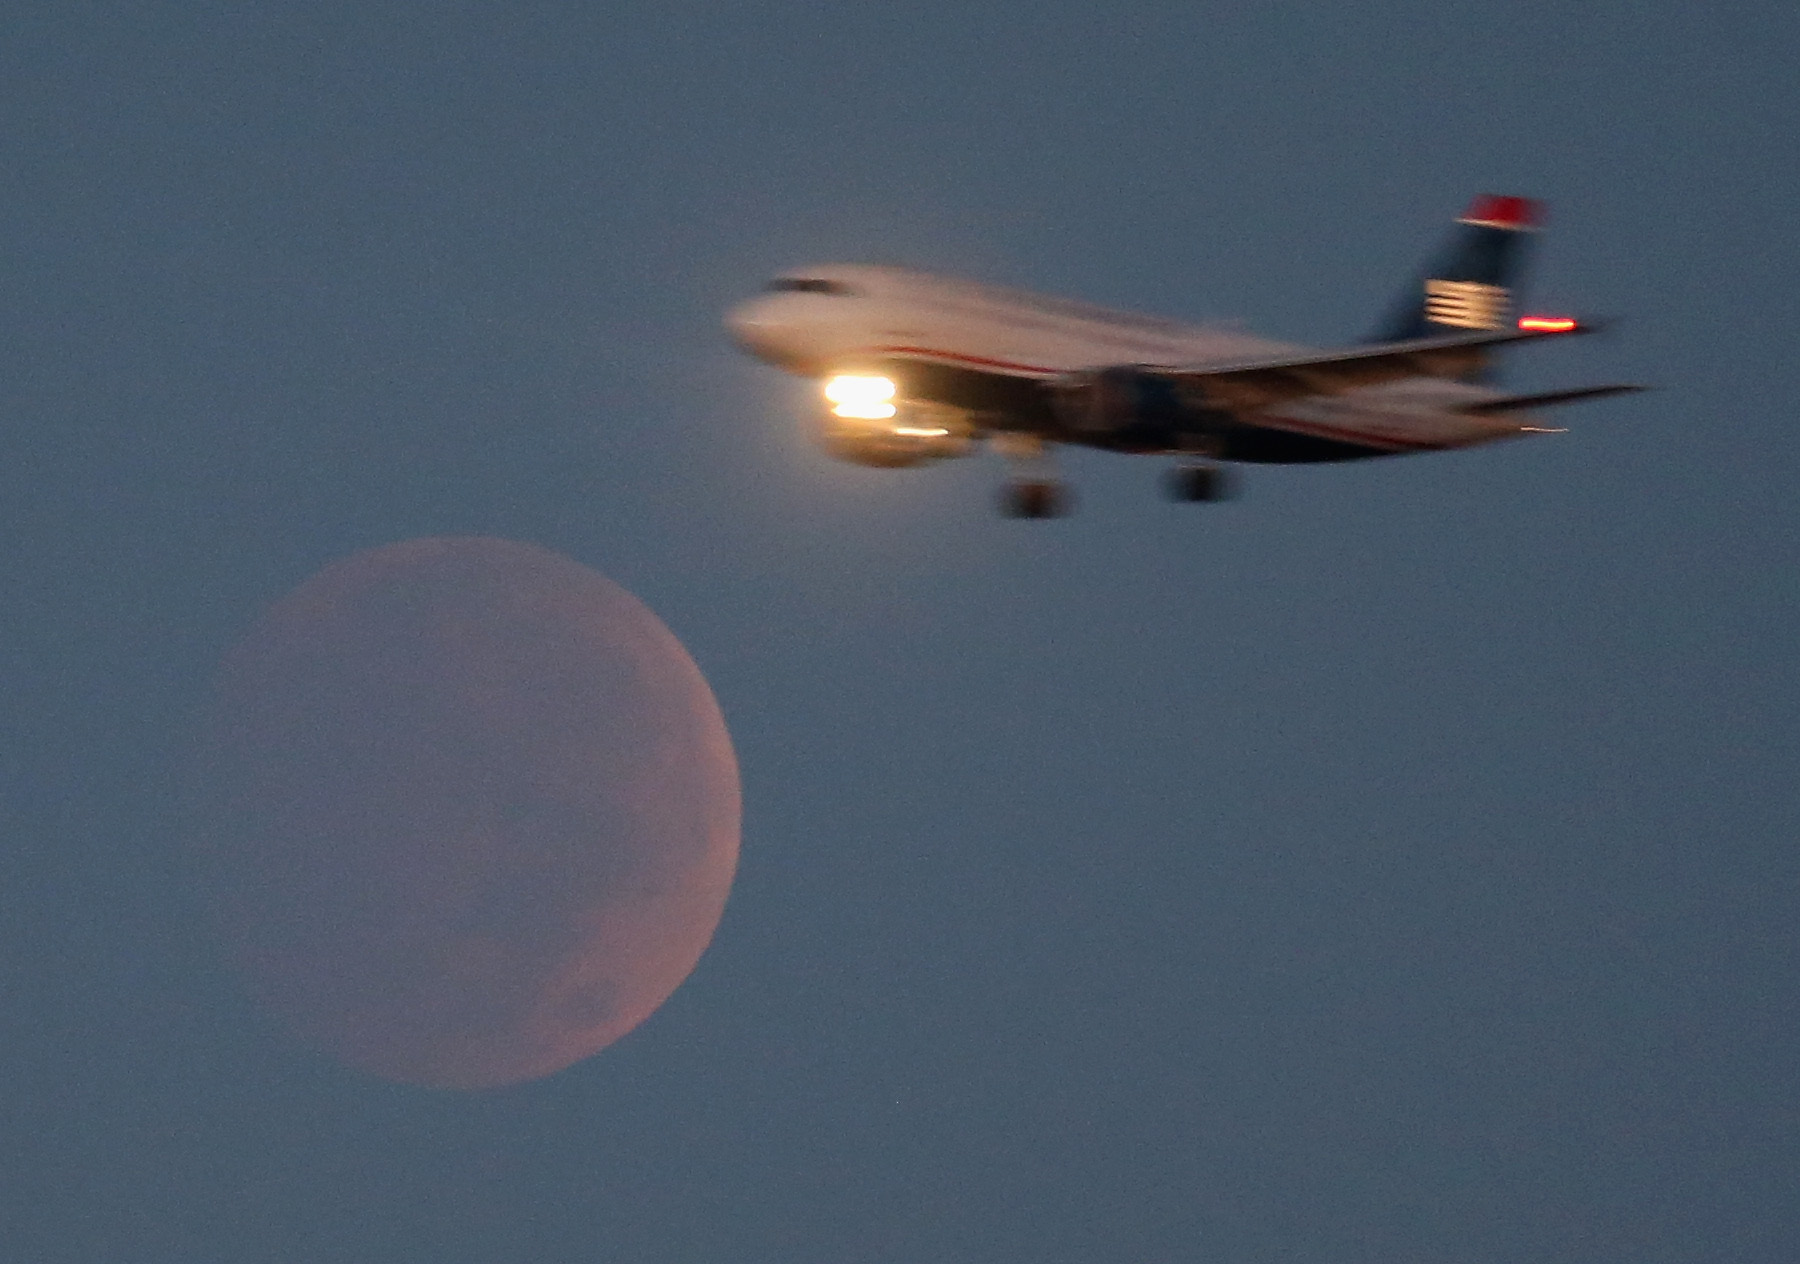 Check out amazing photos of last night's lunar eclipse and blood moon